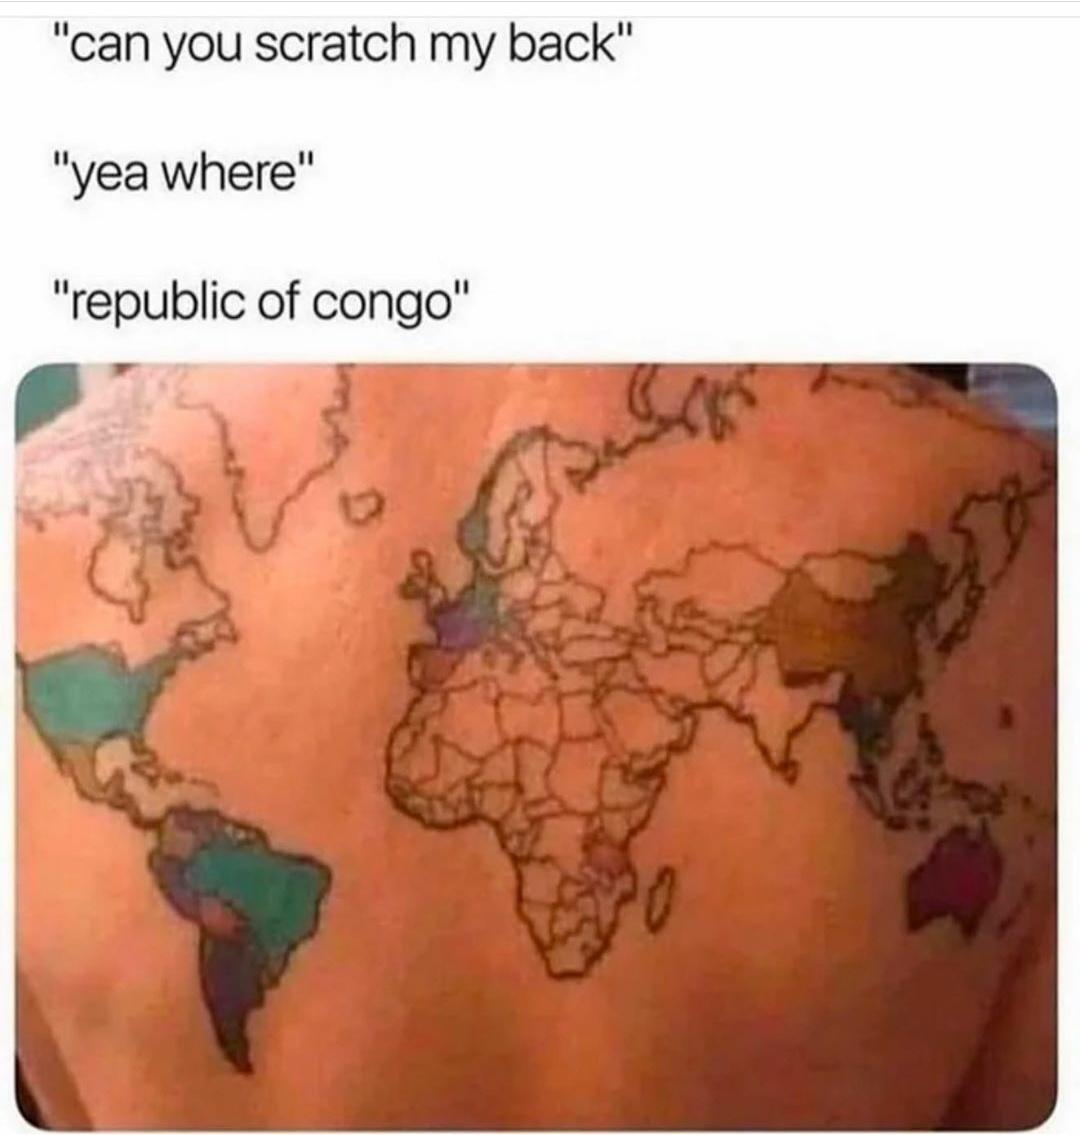 countries tattoo - "can you scratch my back" "yea where" "republic of Congo"